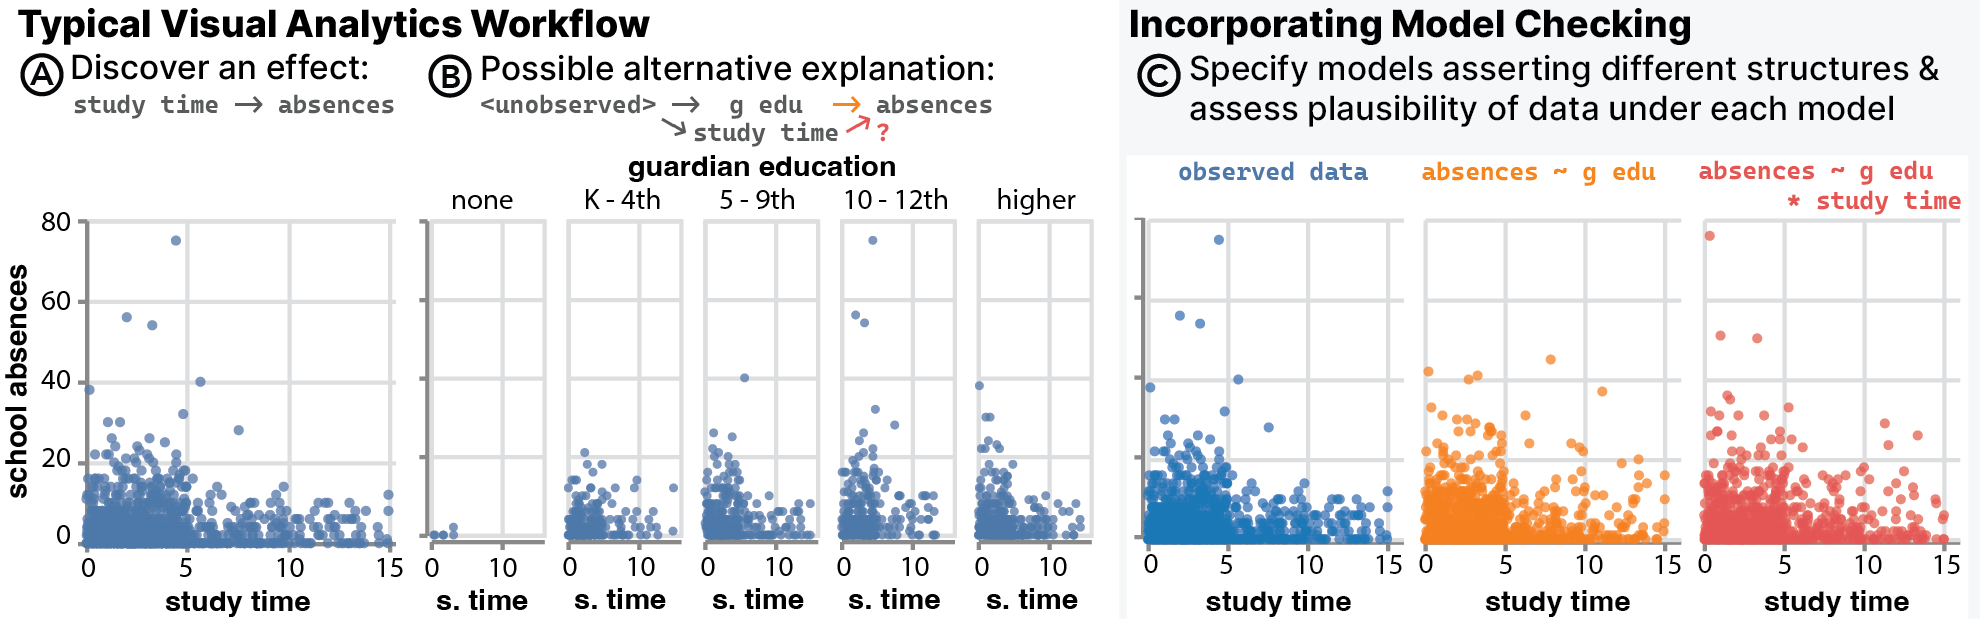 Figure for EVM: Incorporating Model Checking into Exploratory Visual Analysis